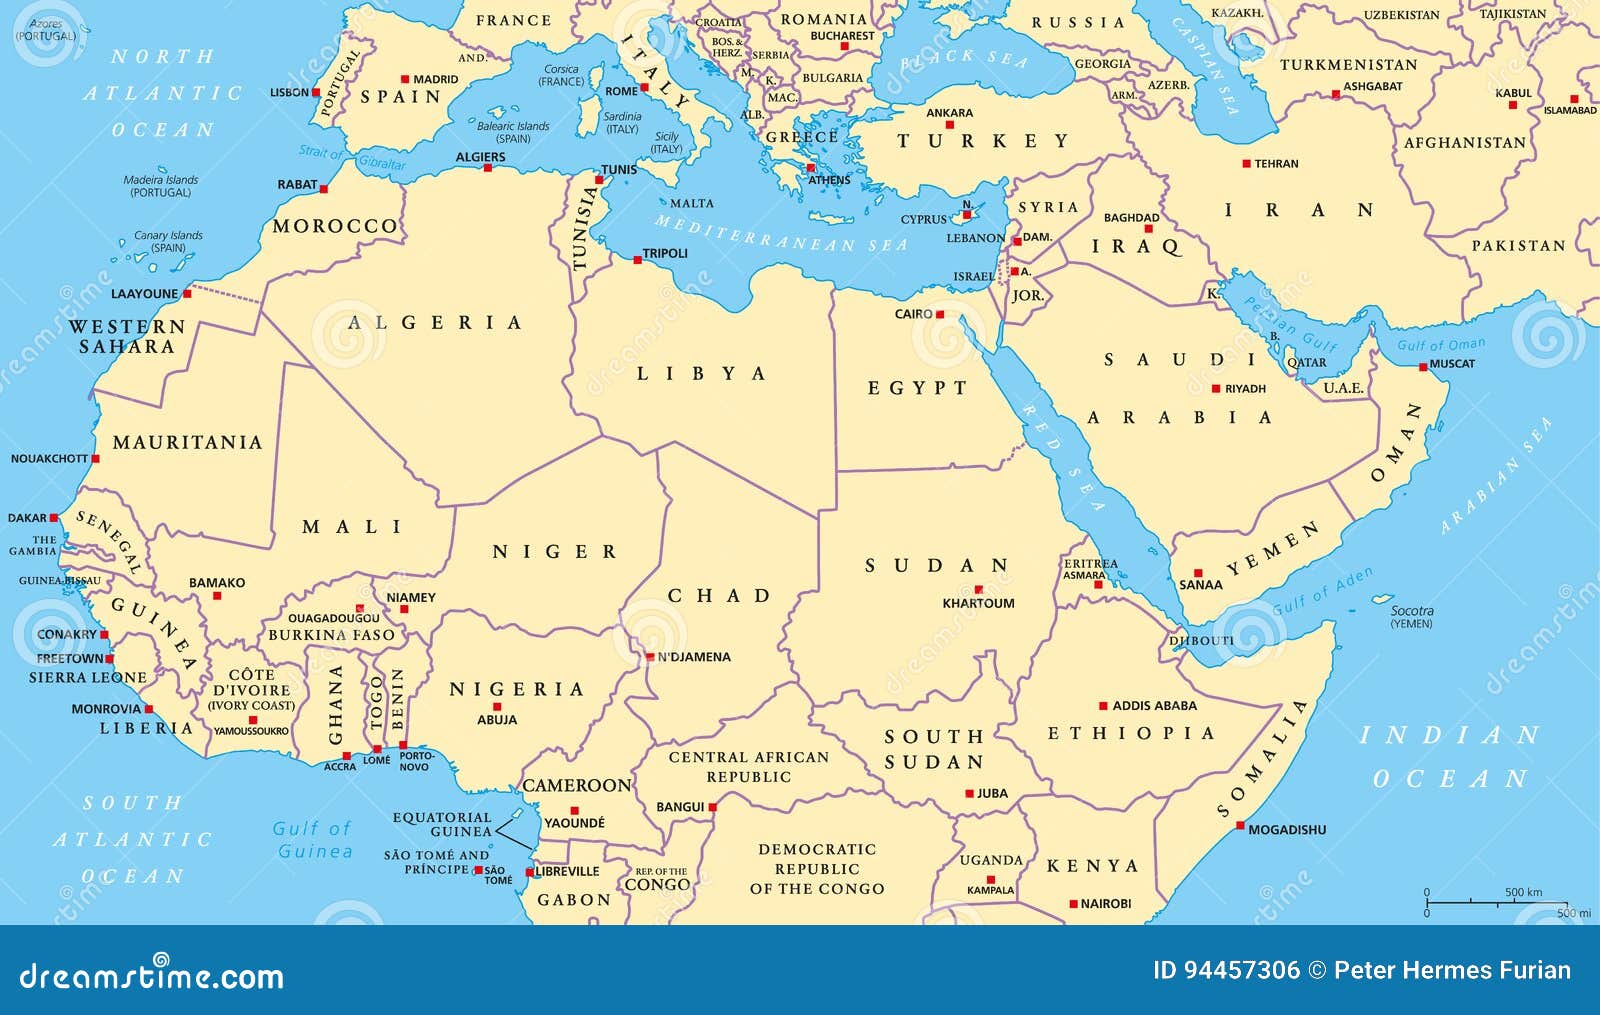 north africa and middle east political map